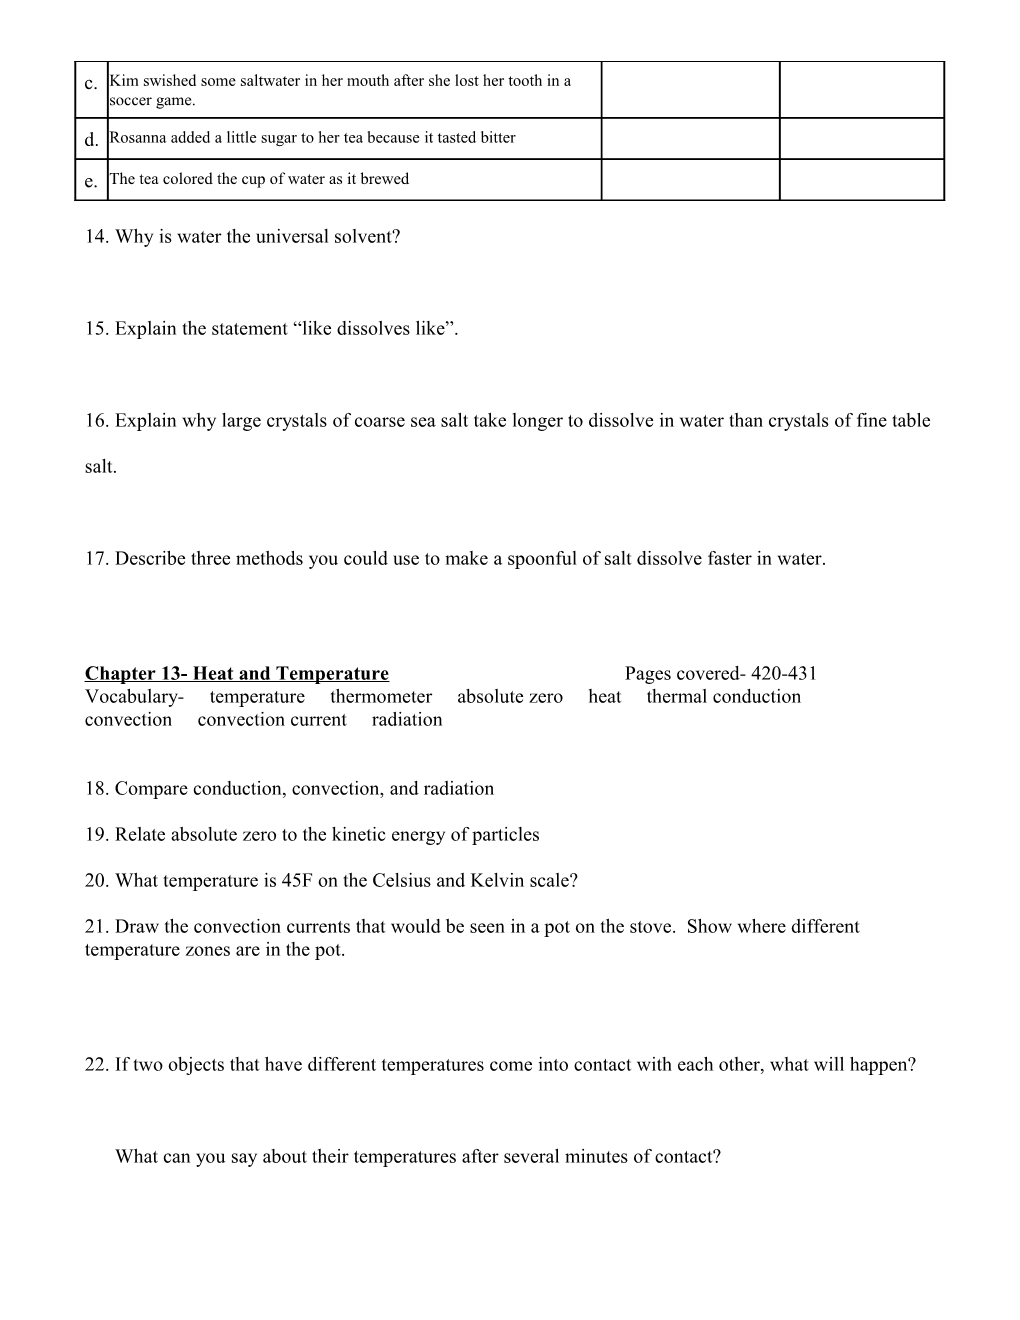 Physical Science Semester 1 Final Exam Review 2003-2004